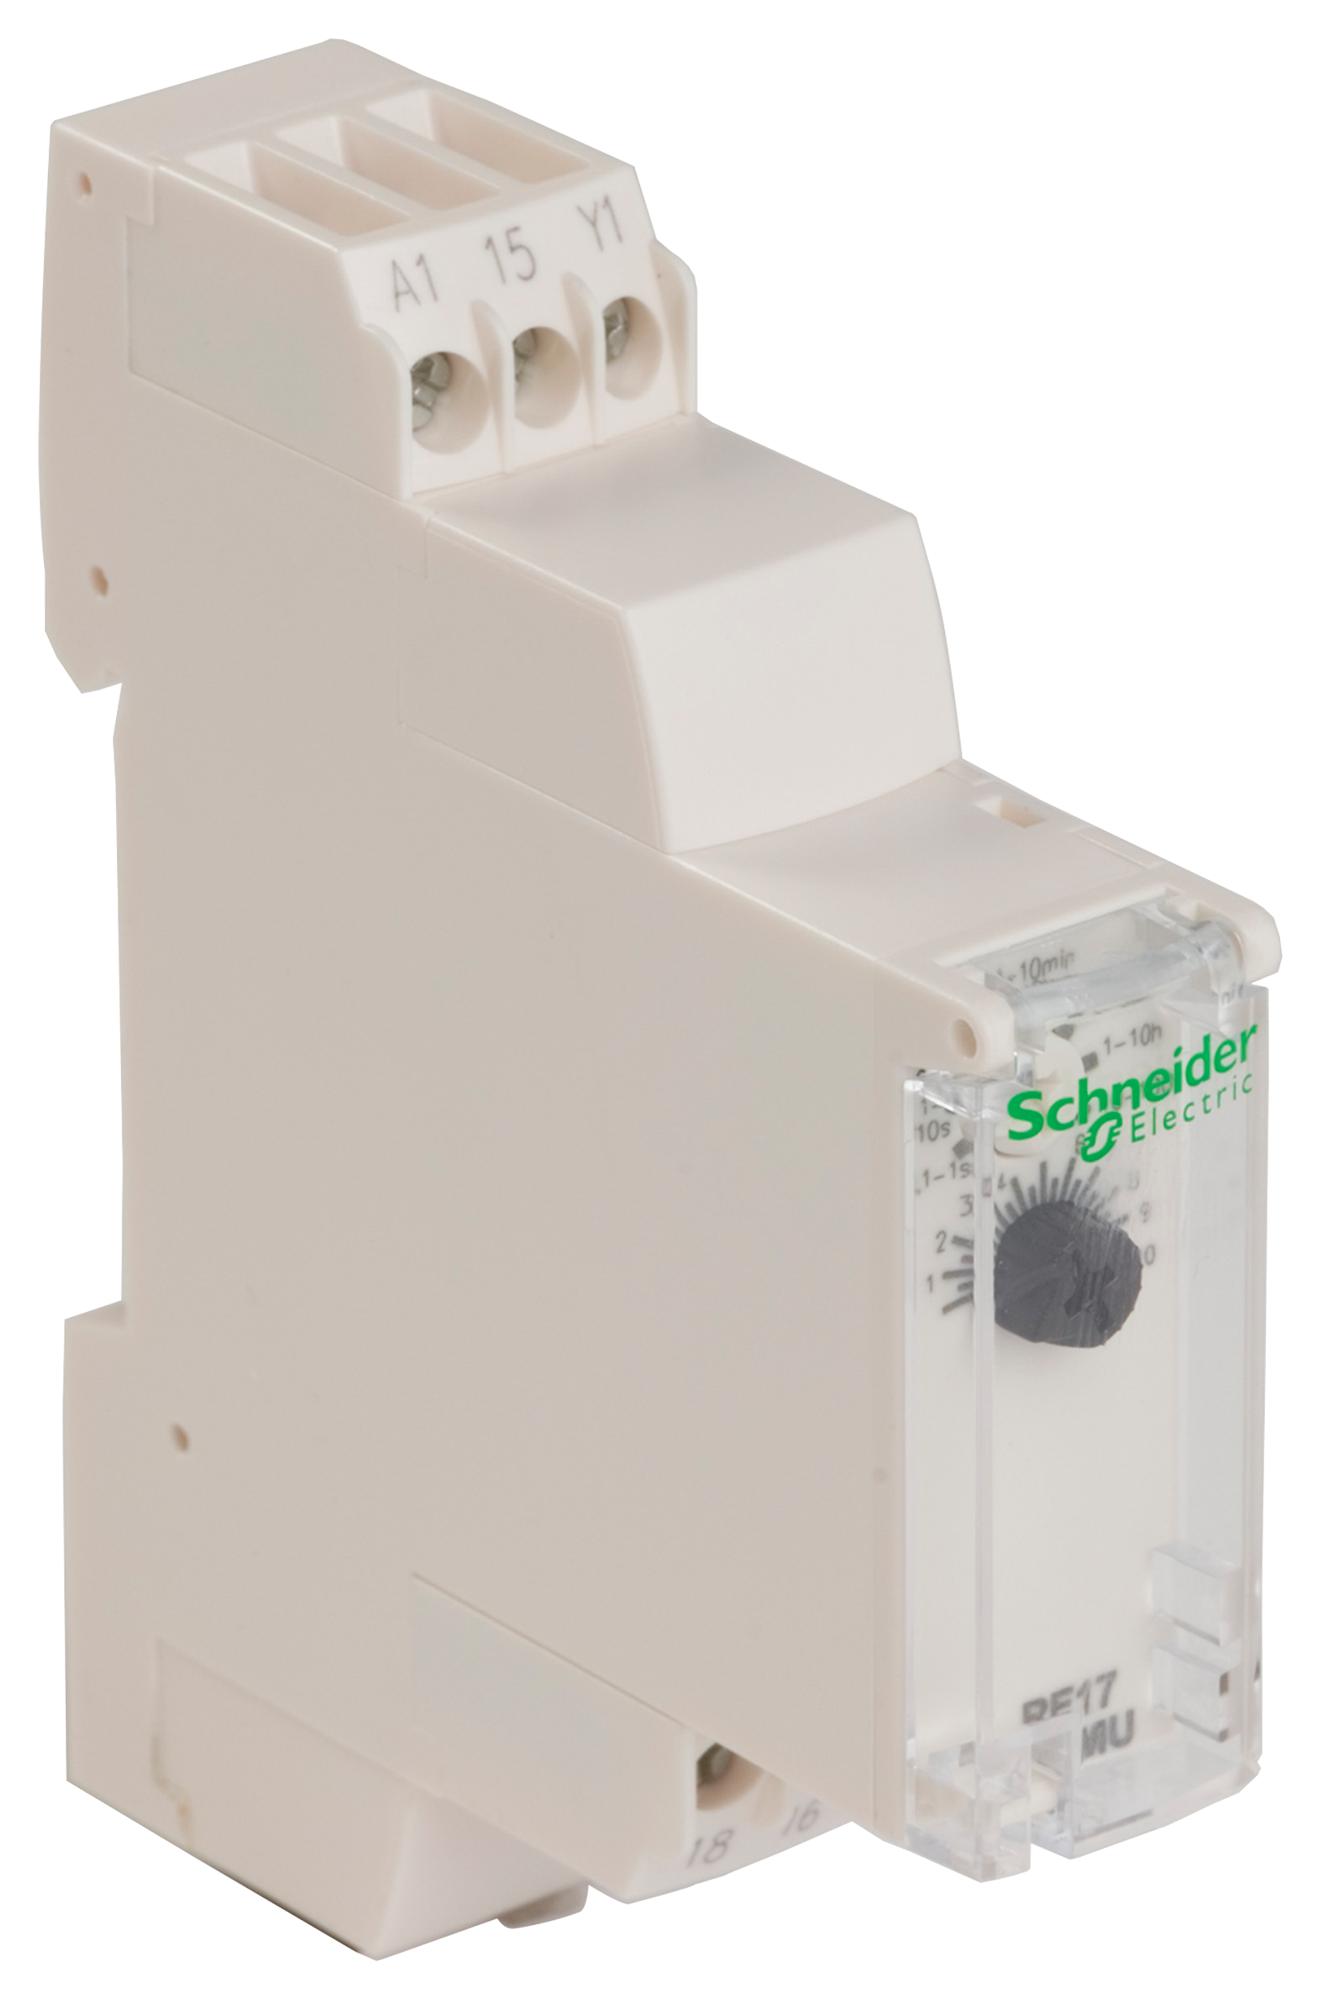 RE17RAMU TIME DELAY RELAY, SPDT, 1S-100HOUR, 24V SCHNEIDER ELECTRIC